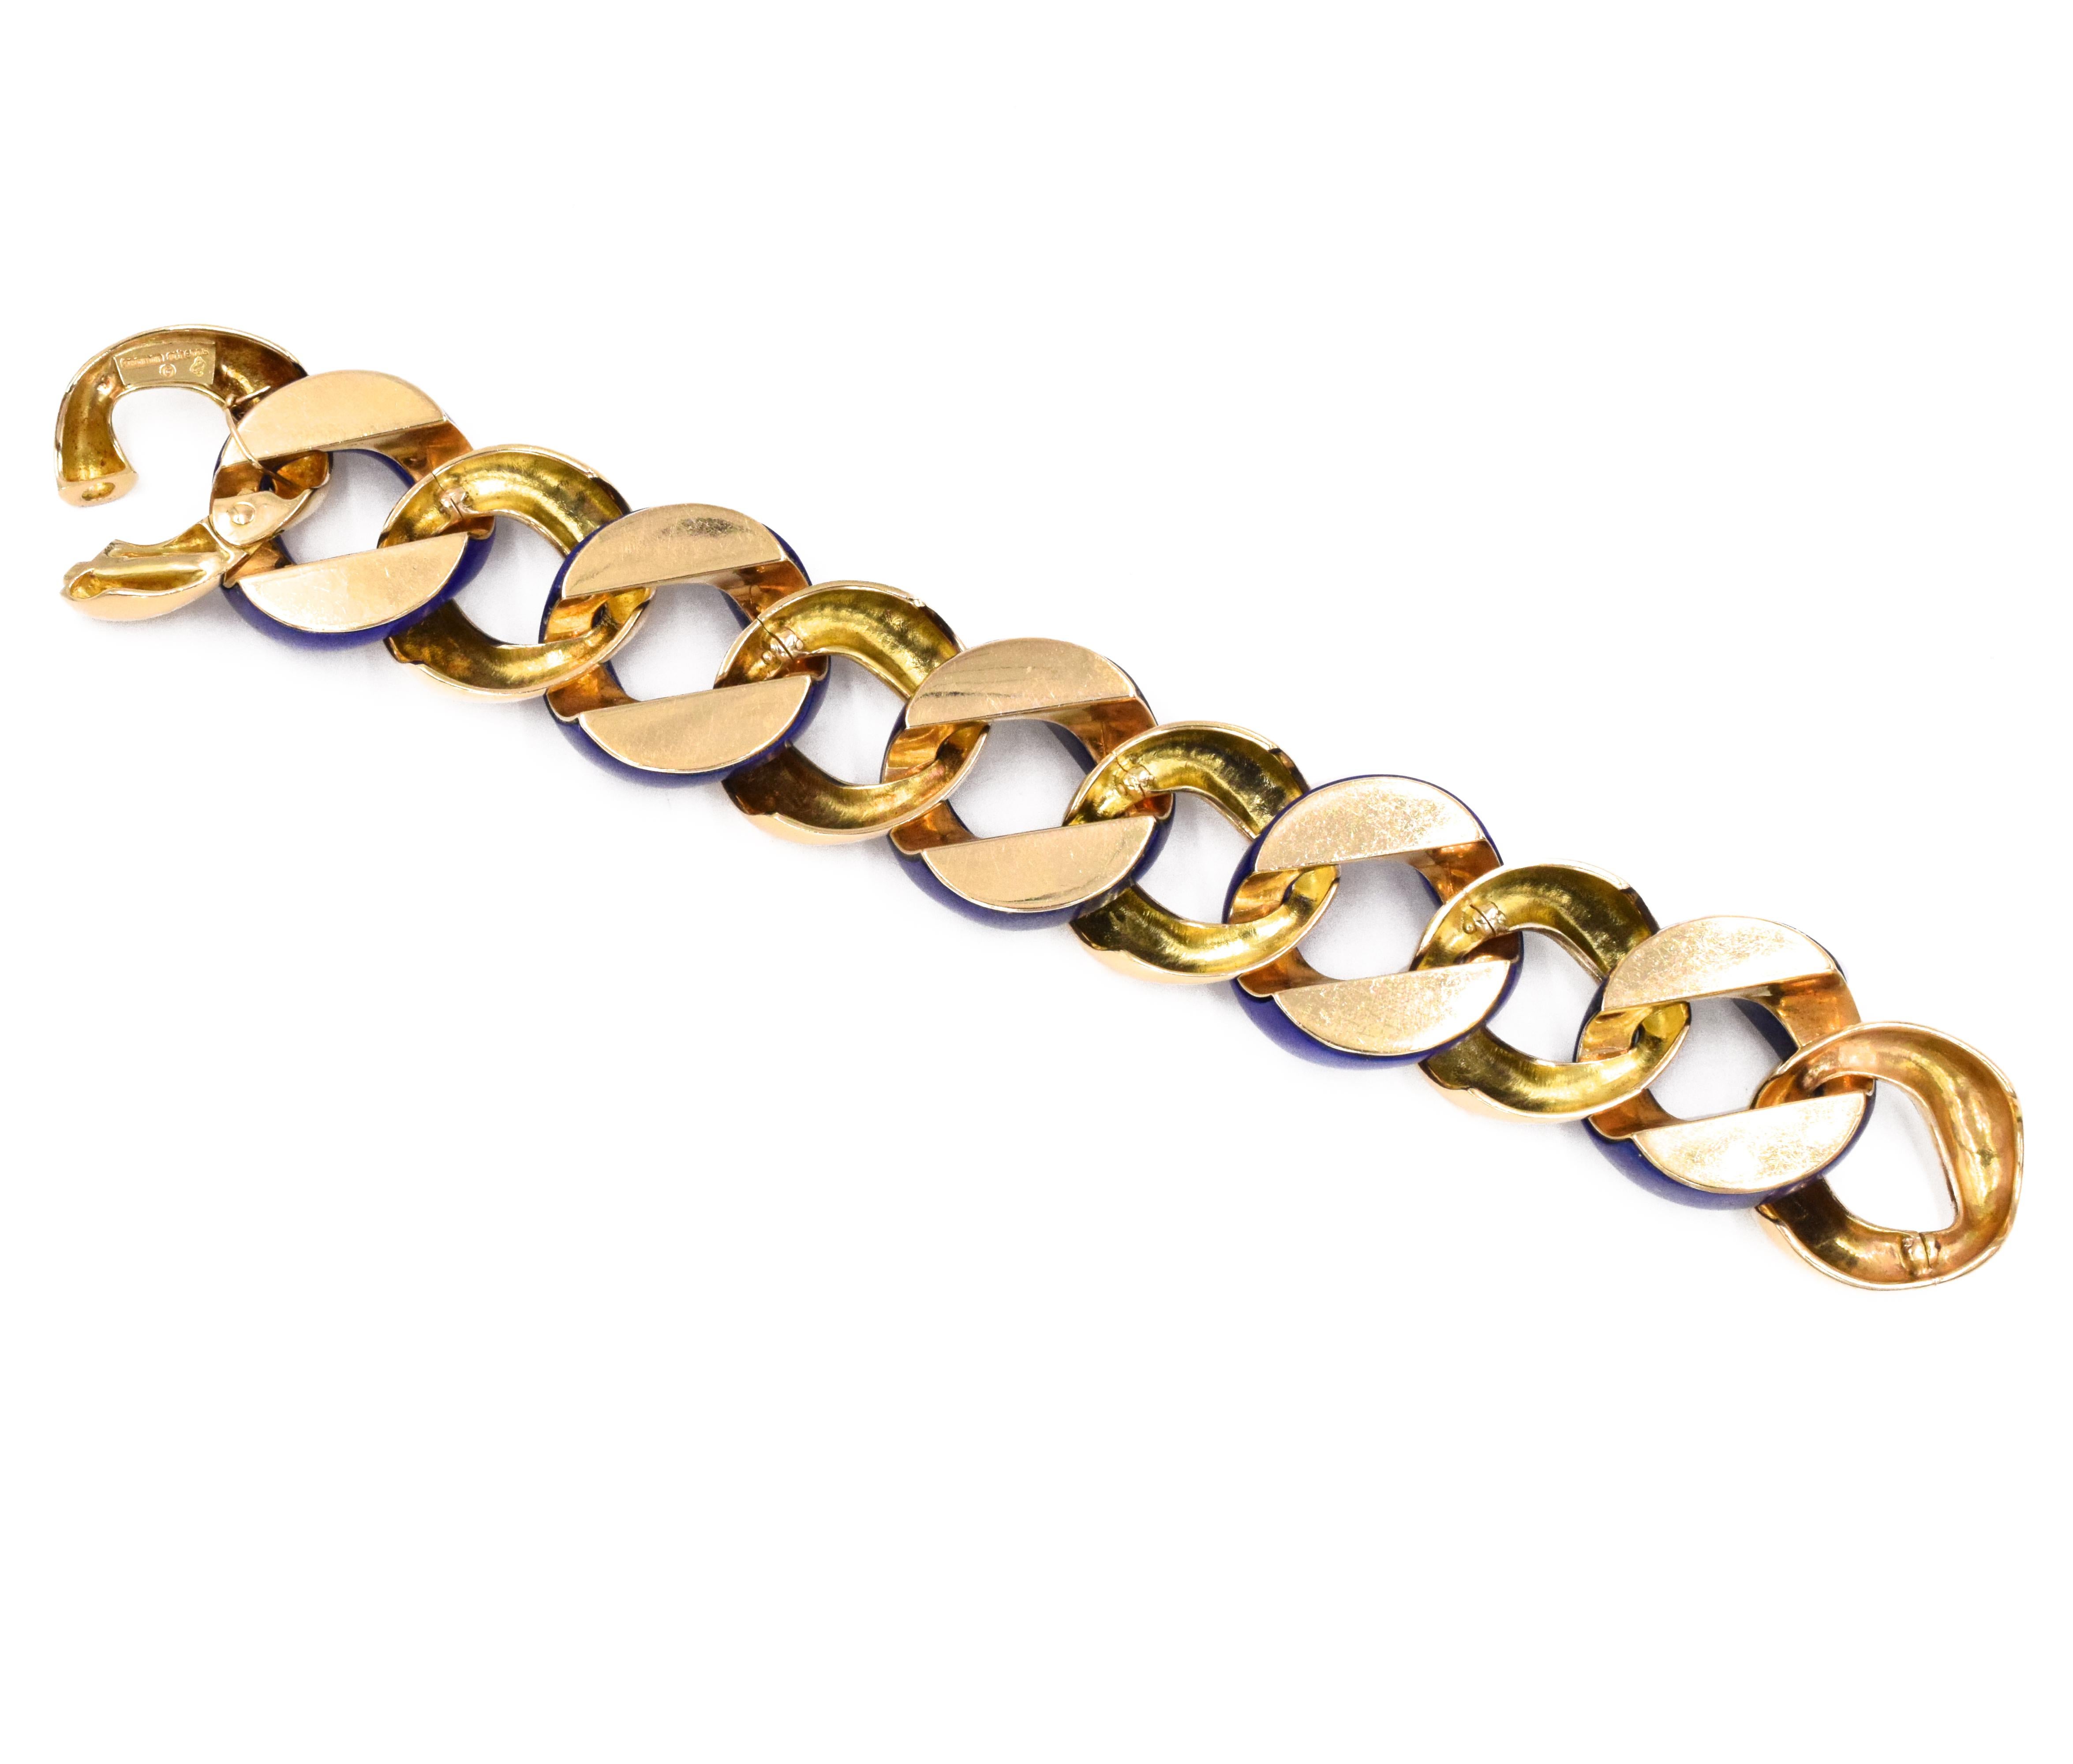 Trademark style Seaman Schepps Lapis Lazuli and Gold Bracelet. This bracelet has links in 18k yellow gold and Lapis Lazuli set in 18kt yellow gold. Signed Seaman Schepps and makers mark. Length: 8.5 inches.